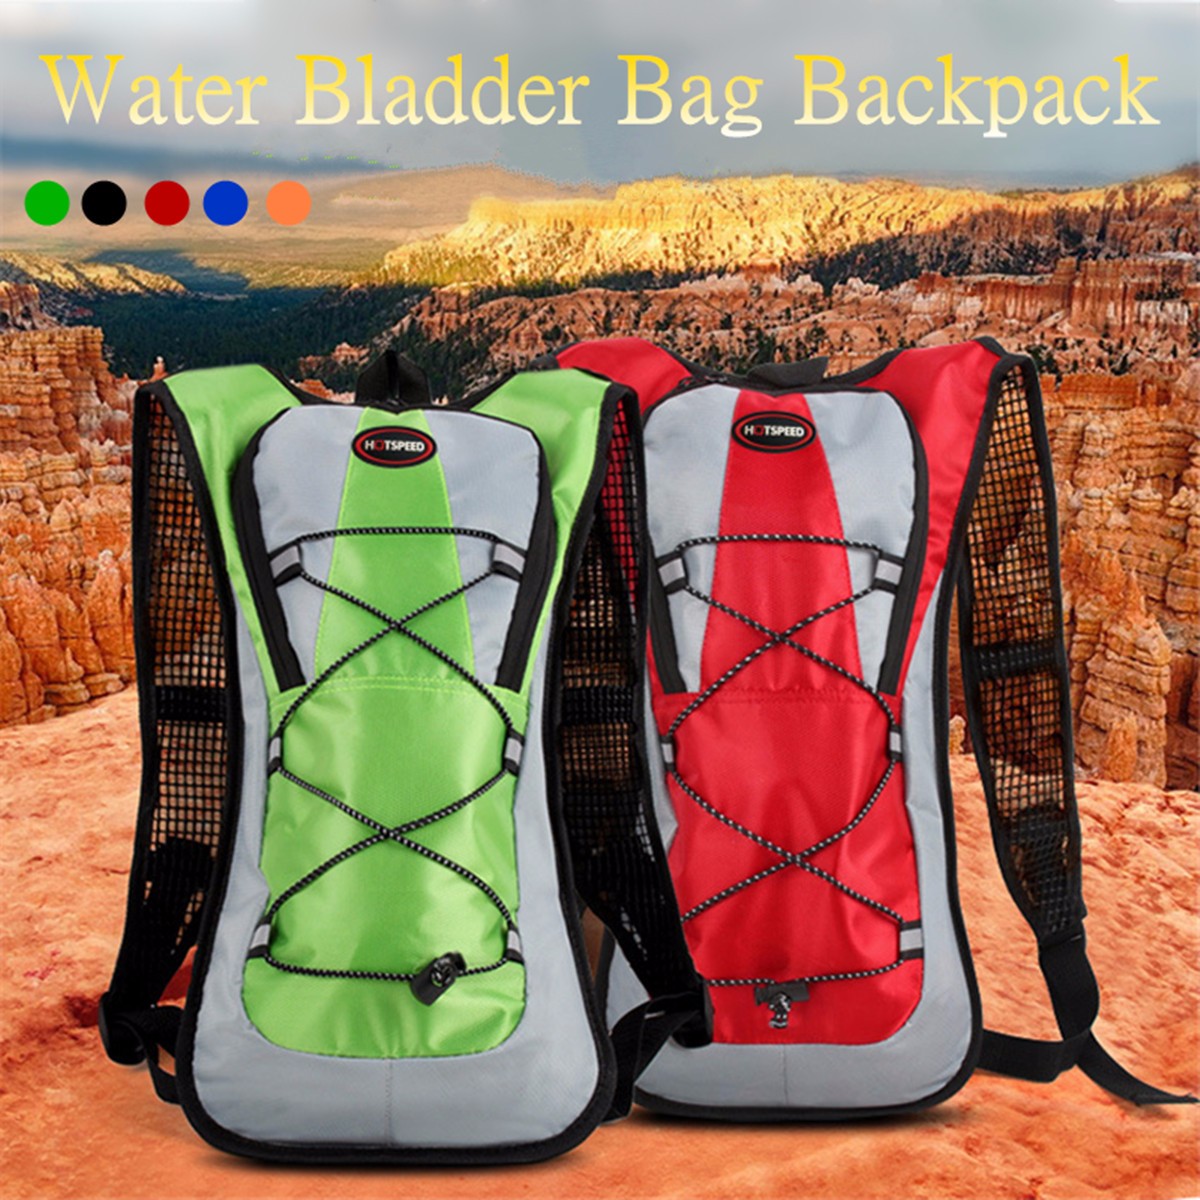 IPRee-5L-Running-Hydration-Backpack-Rucksack-2L-Straw-Water-Bladder-Bag-For-Hiking-Climbing-1126379-1